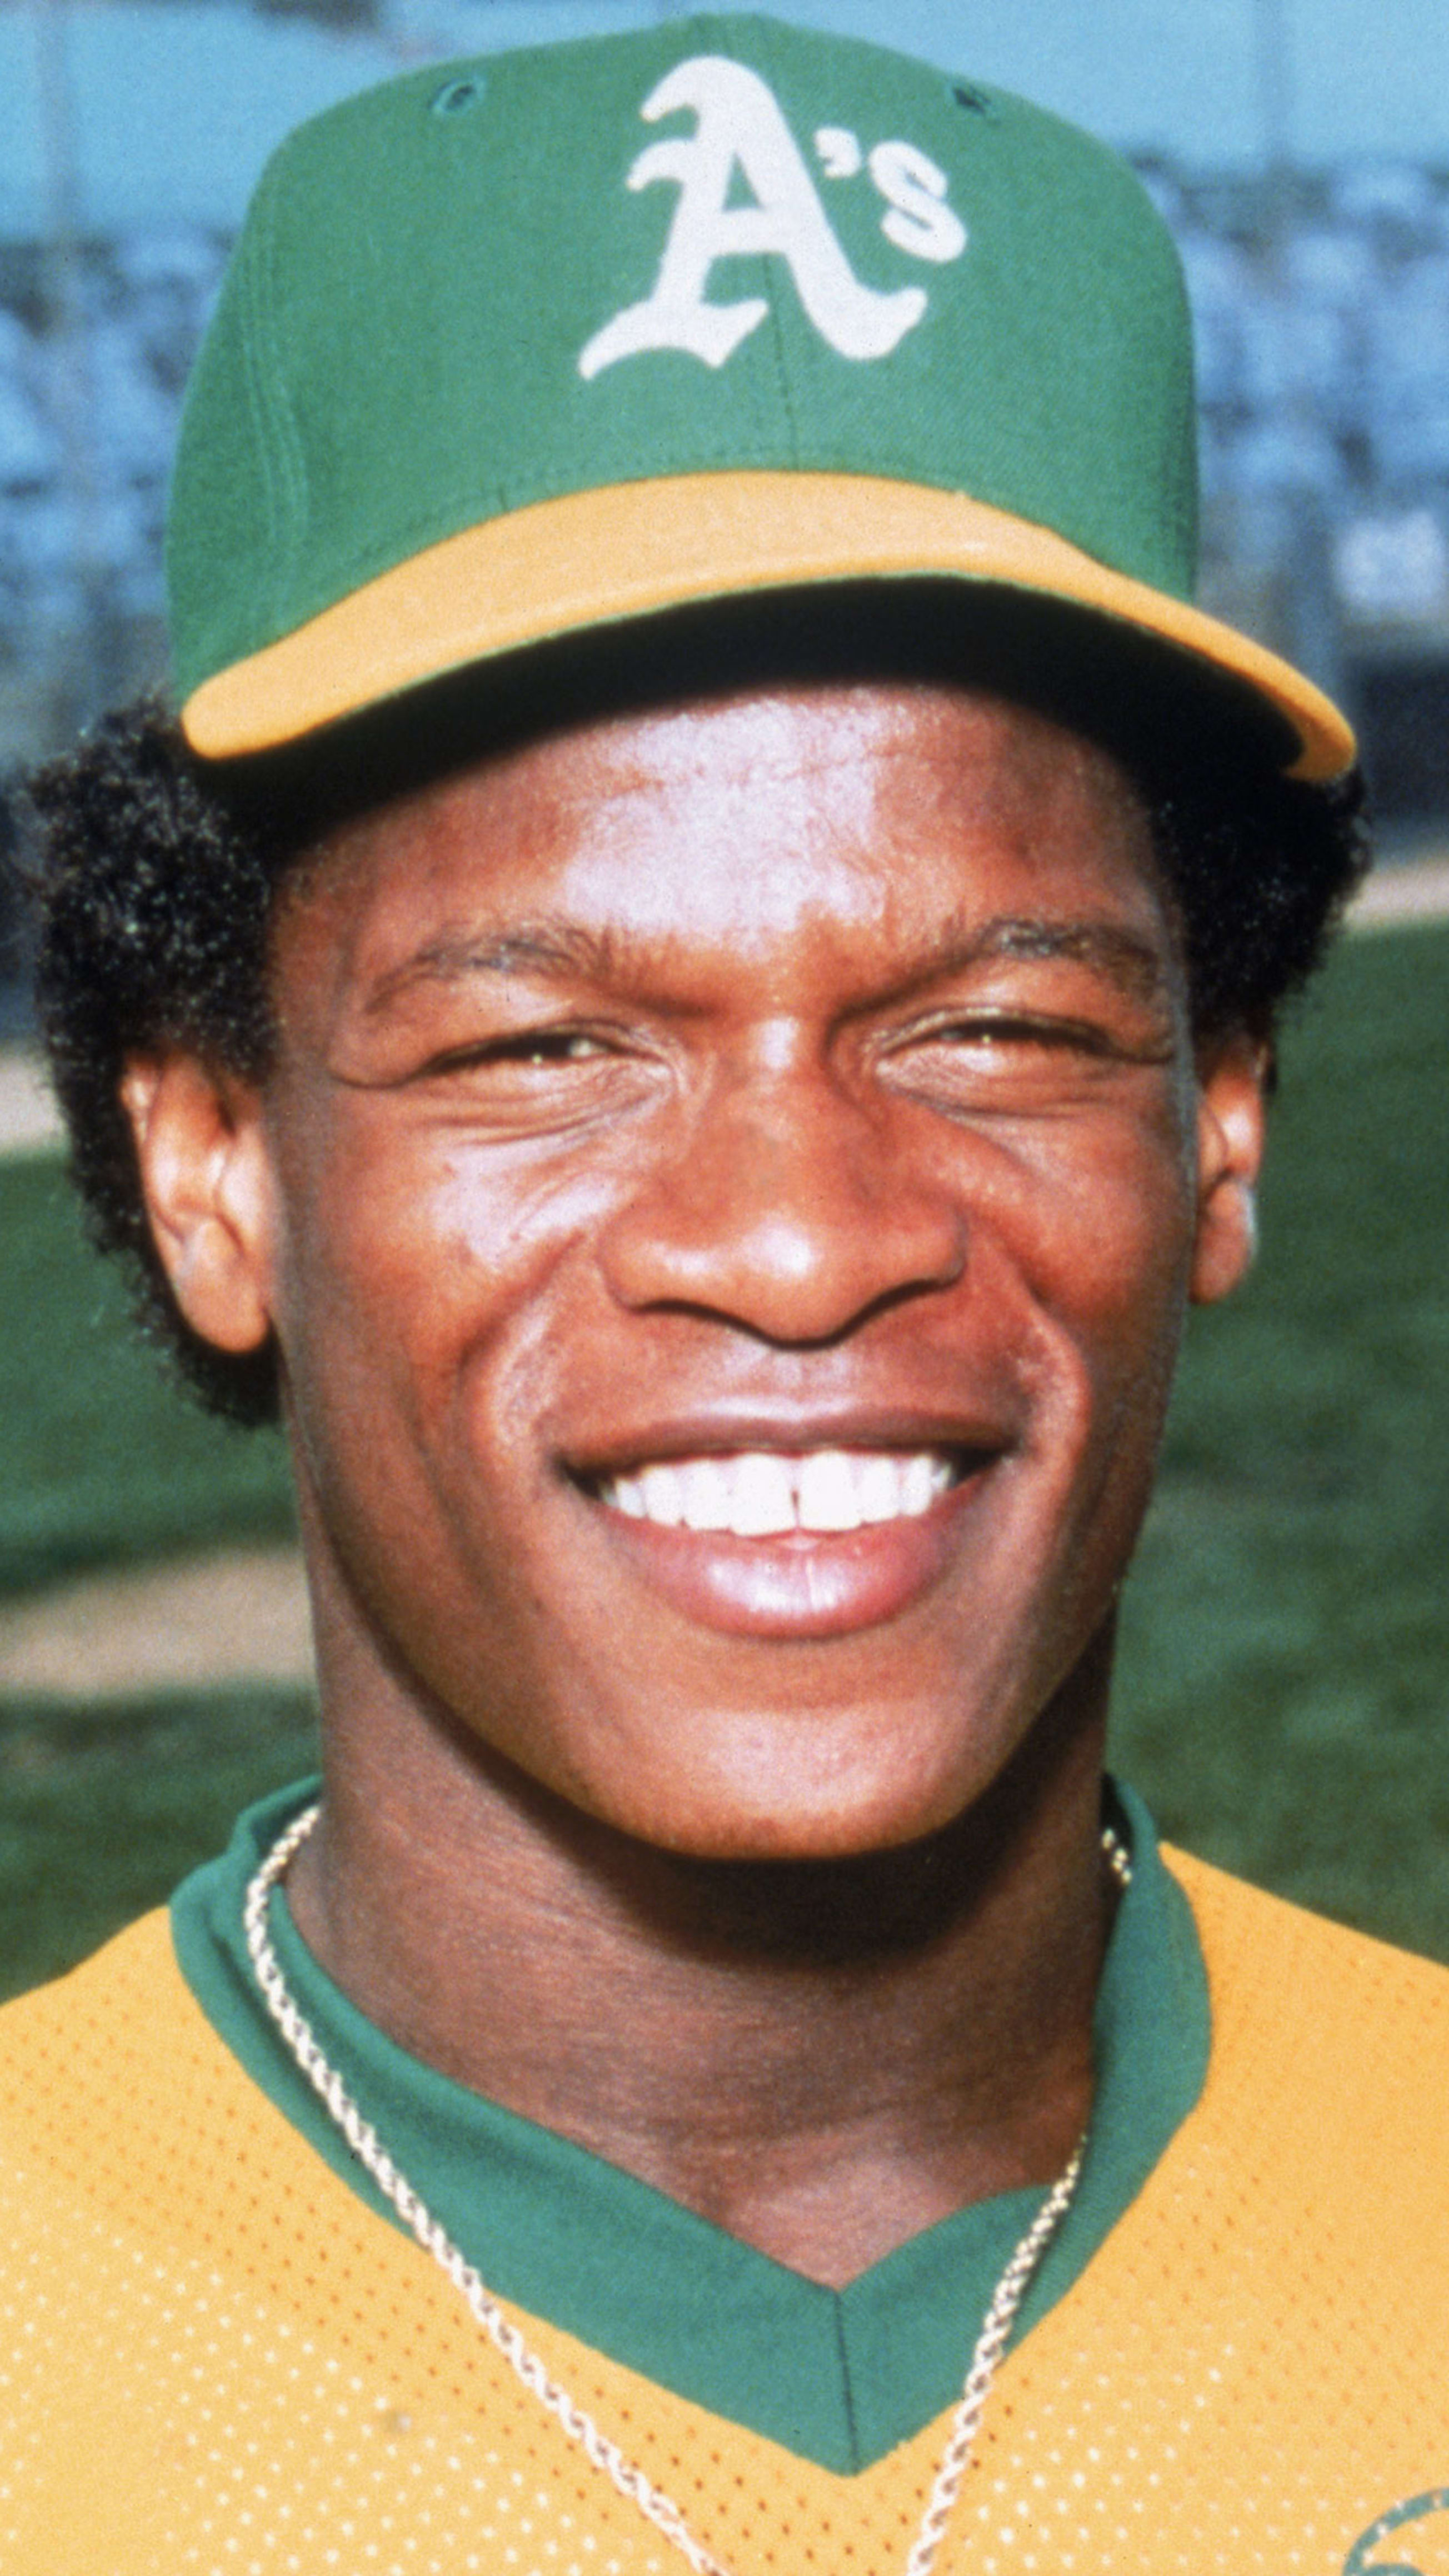 Rickey Henderson and the Little Man of Steal